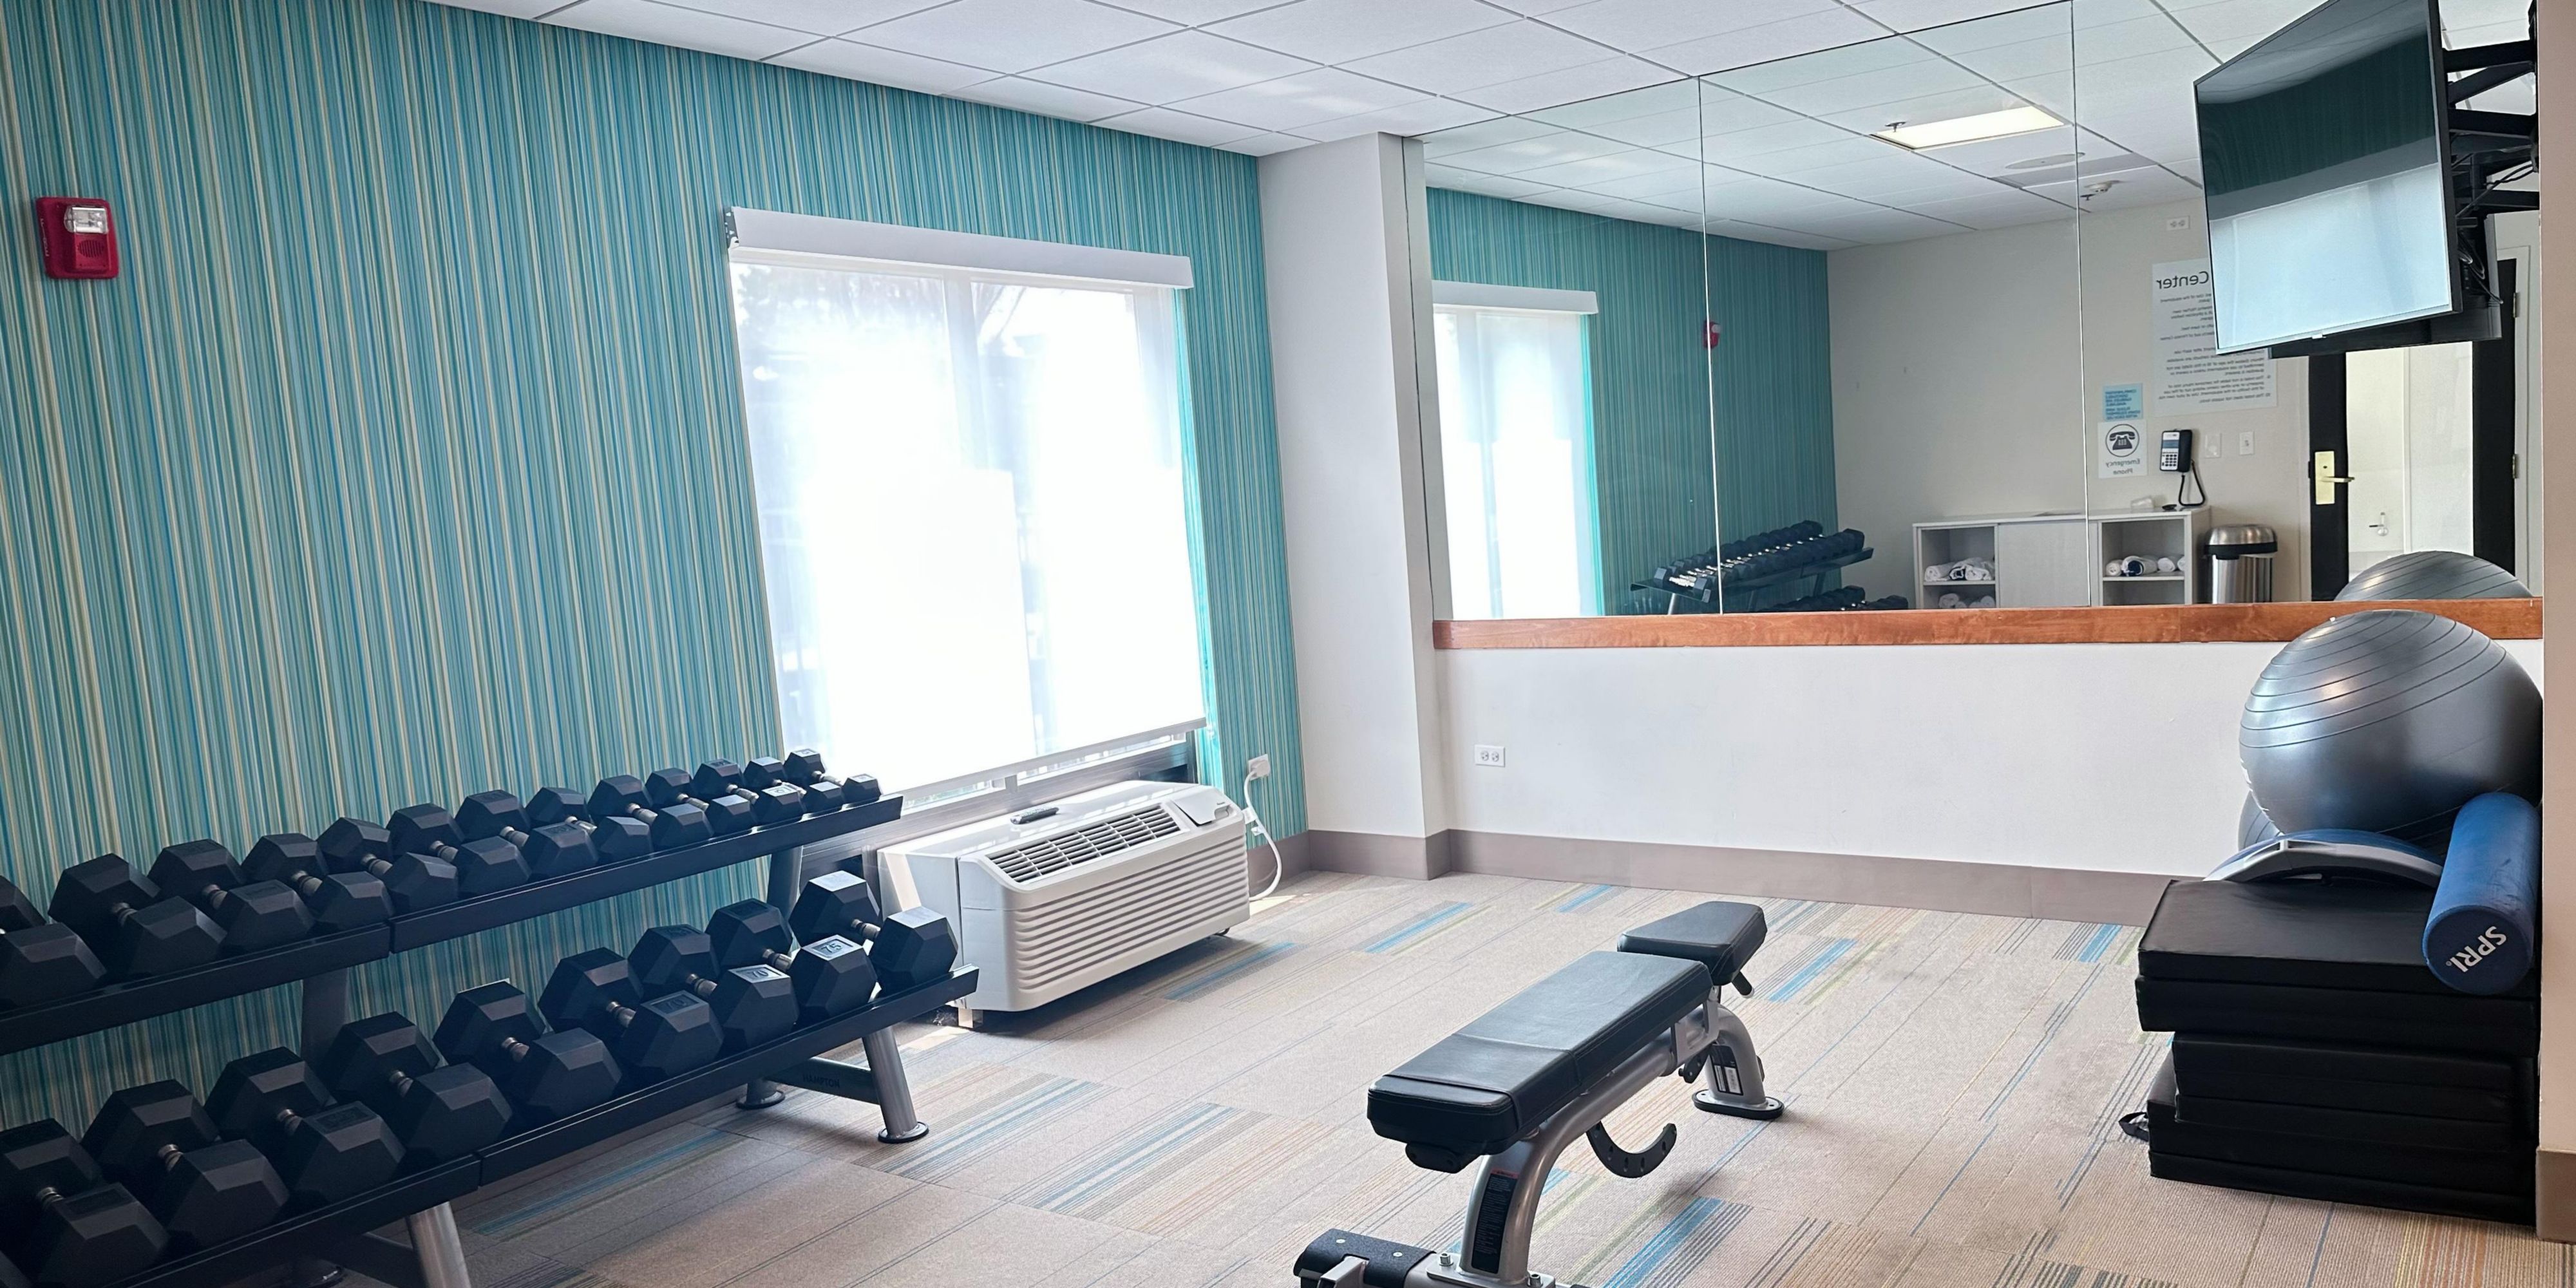 Never skip leg day! Join us in our complimentary fitness center equipped with aerobic options as well as free weights ranging from 10 to 75lbs.